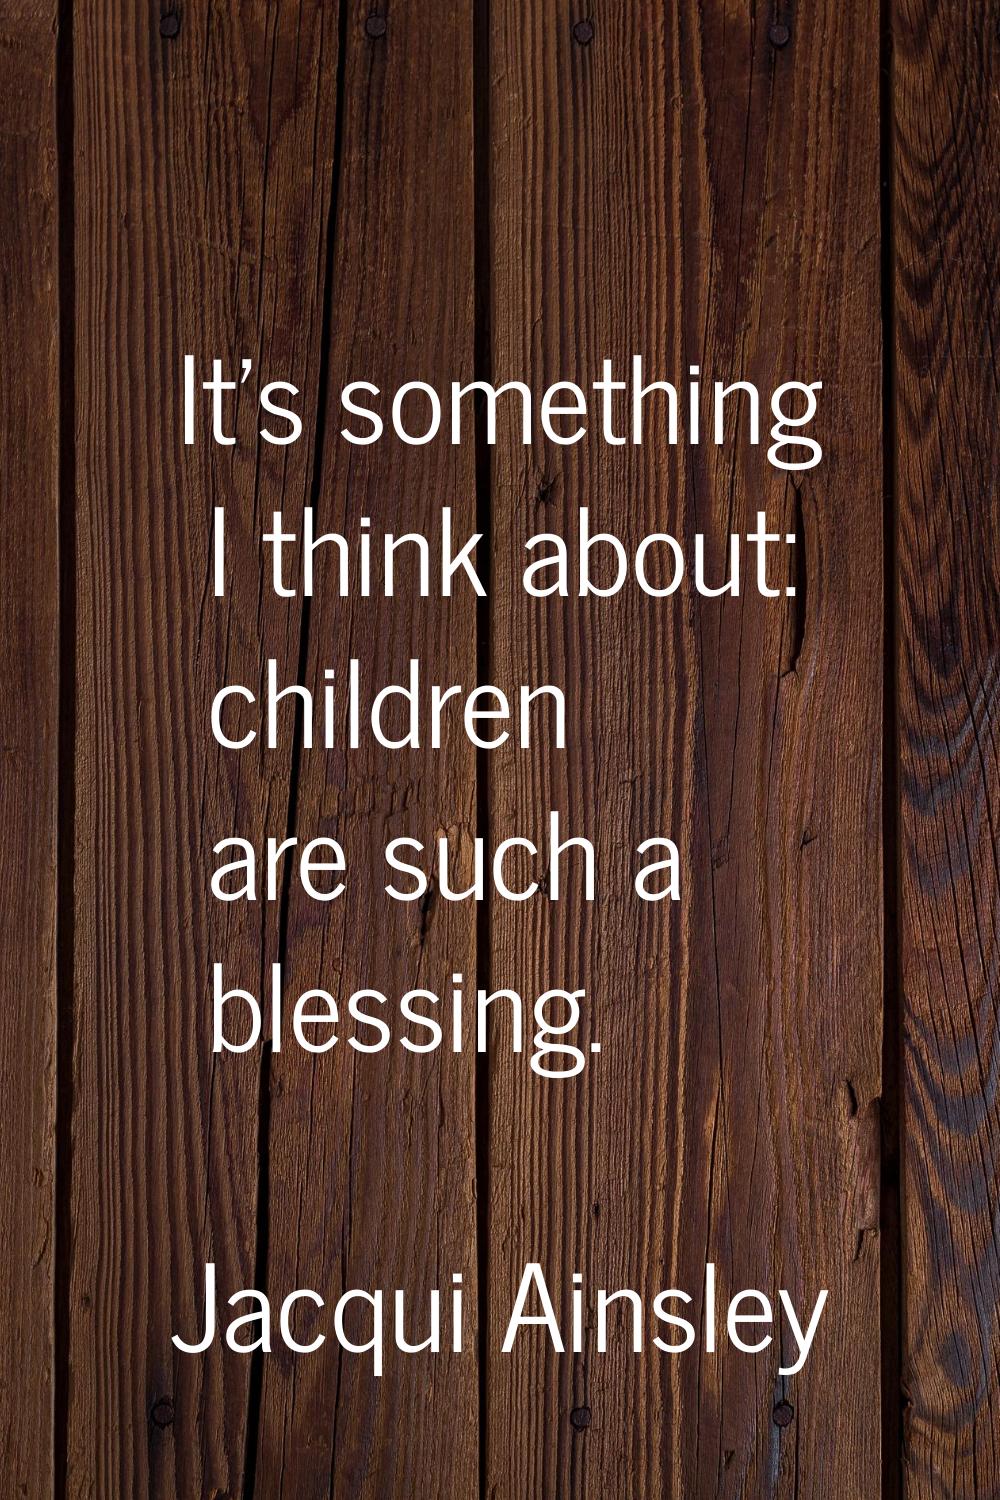 It's something I think about: children are such a blessing.